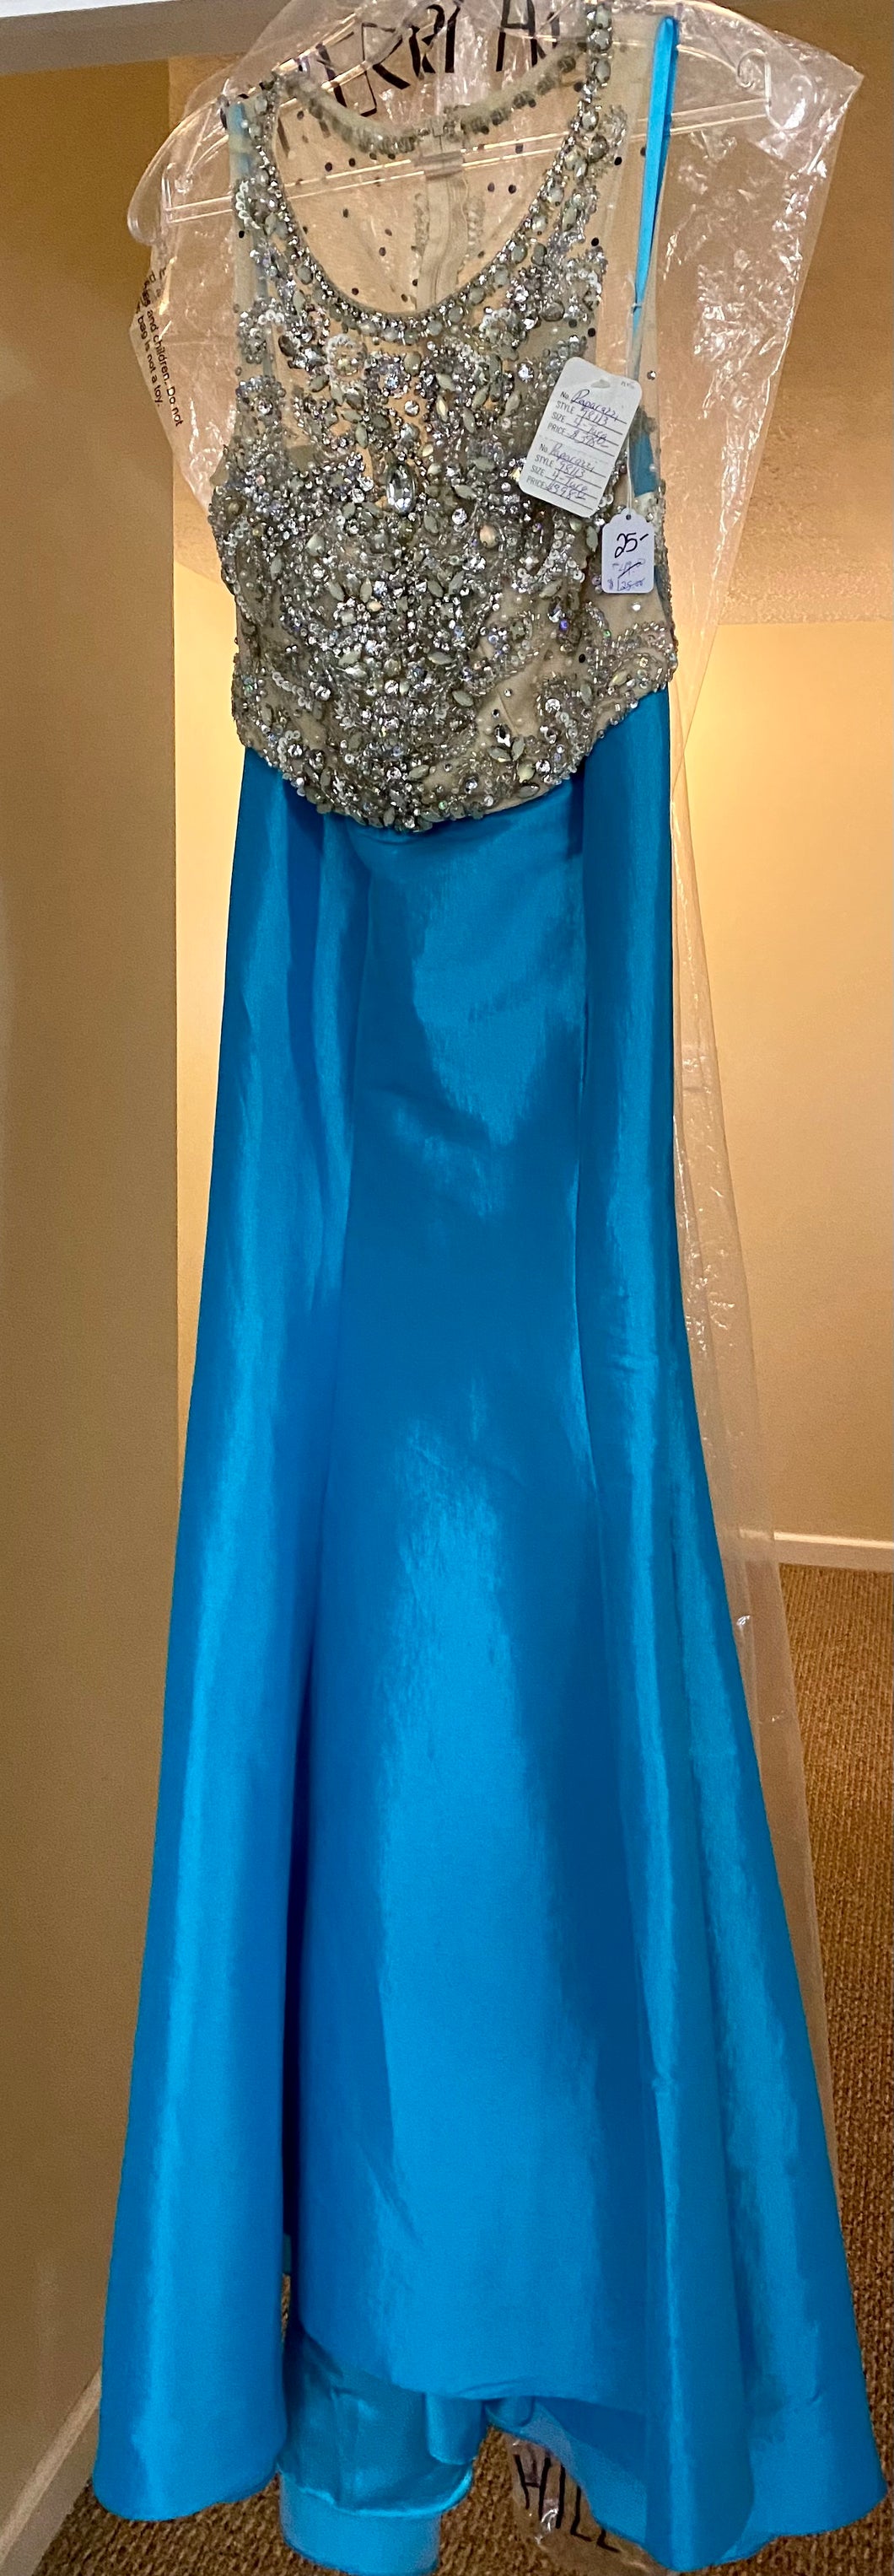 GOWN100-M 2 Piece Turquoise Gown. Size 4